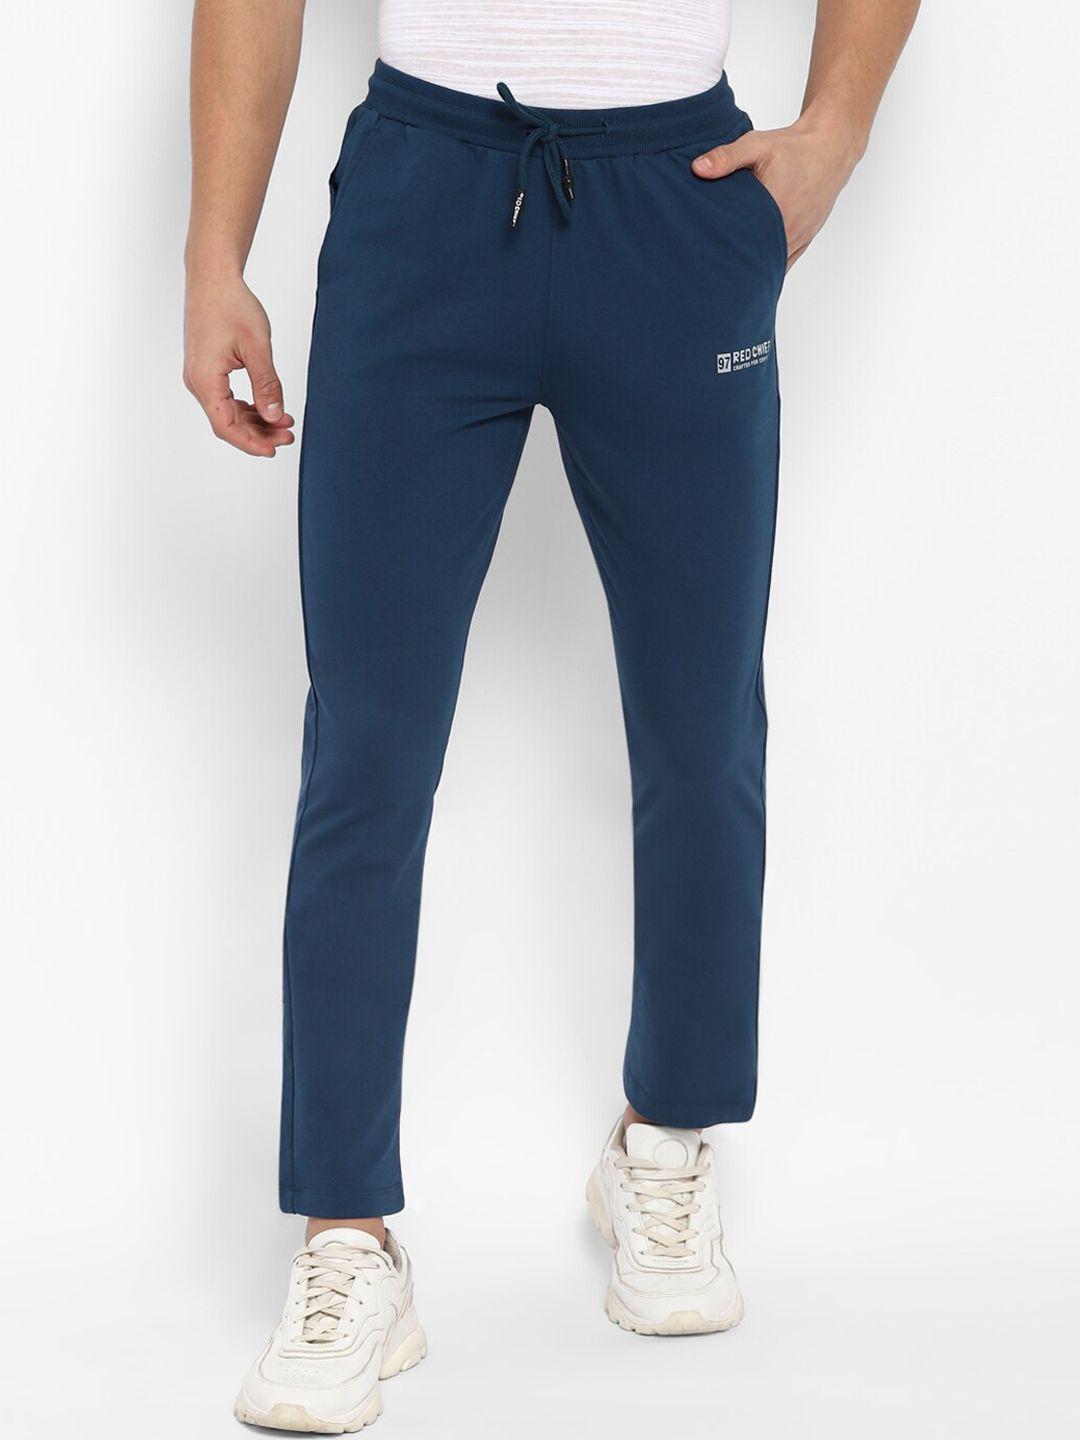 red-chief-men-teal-solid-cotton-track-pants